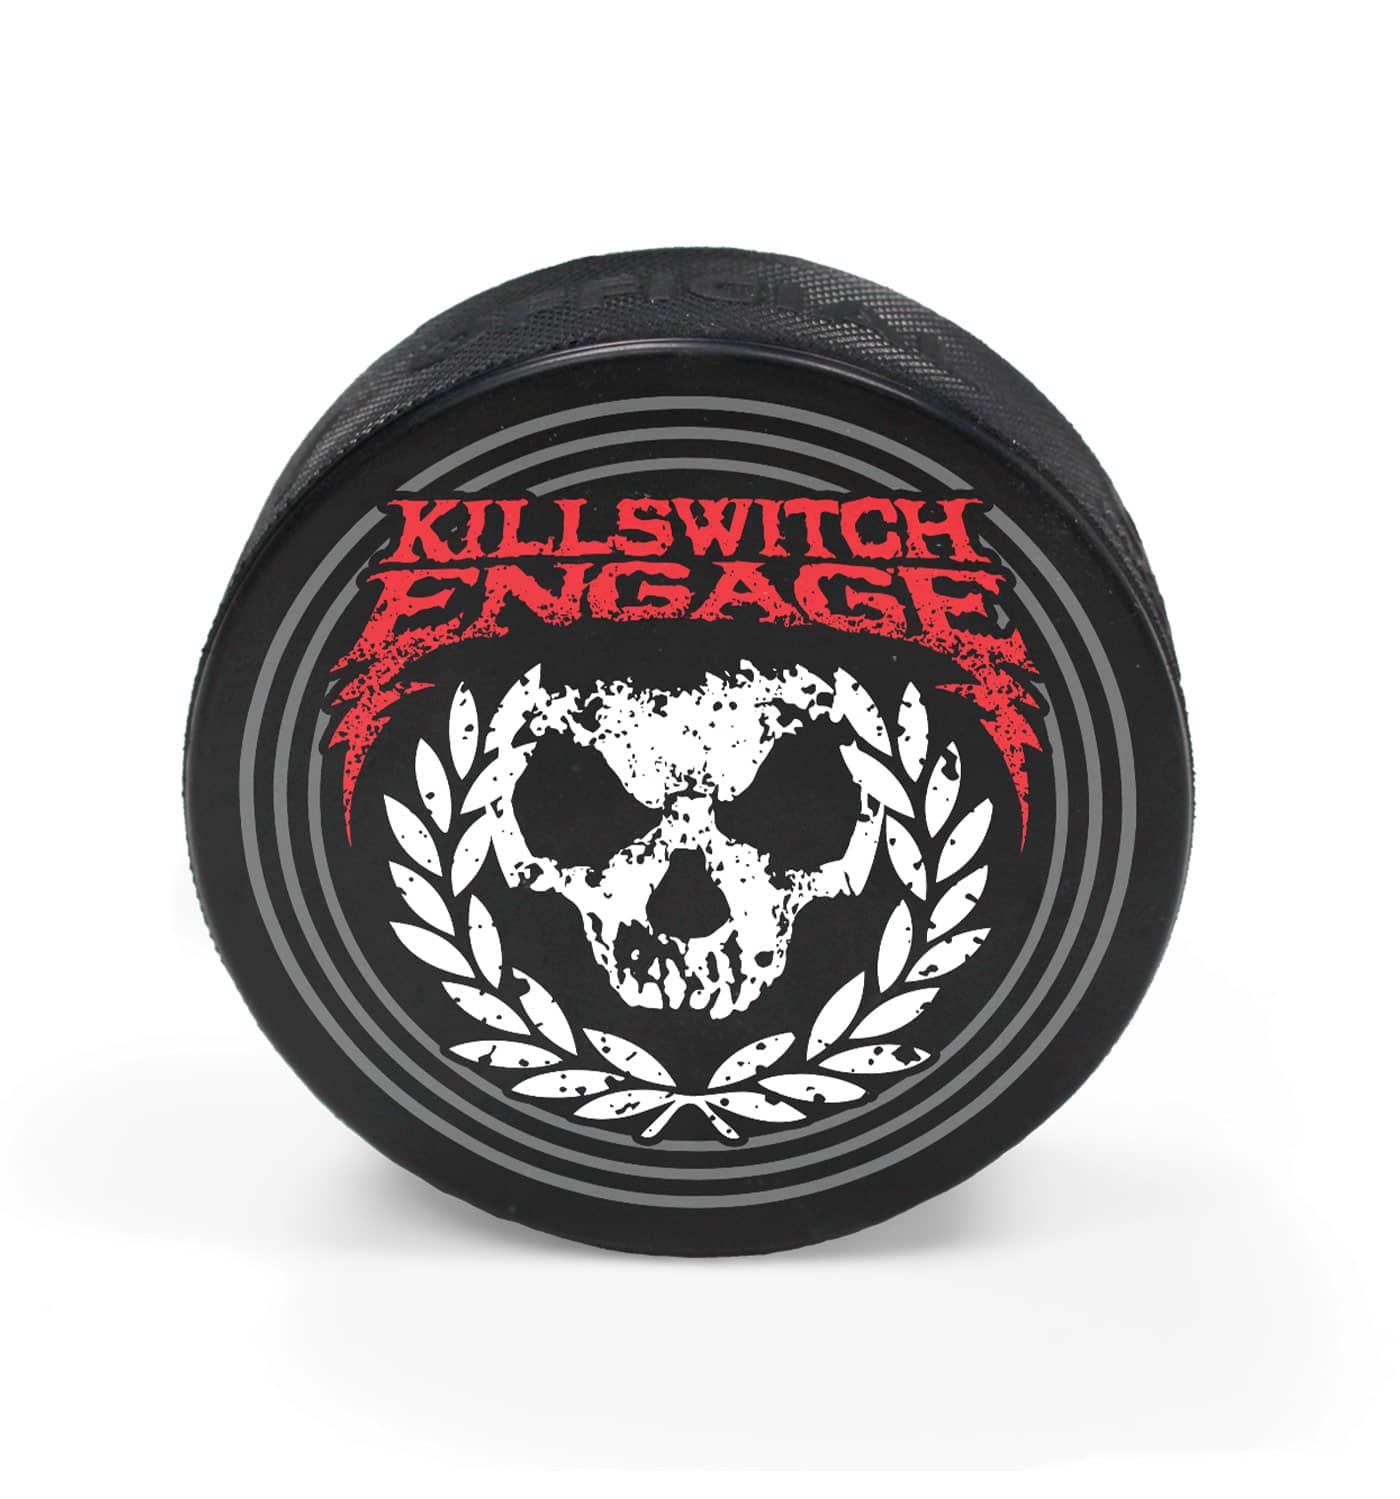 KILLSWITCH ENGAGE 'UNLEASHED' limited edition hockey puck